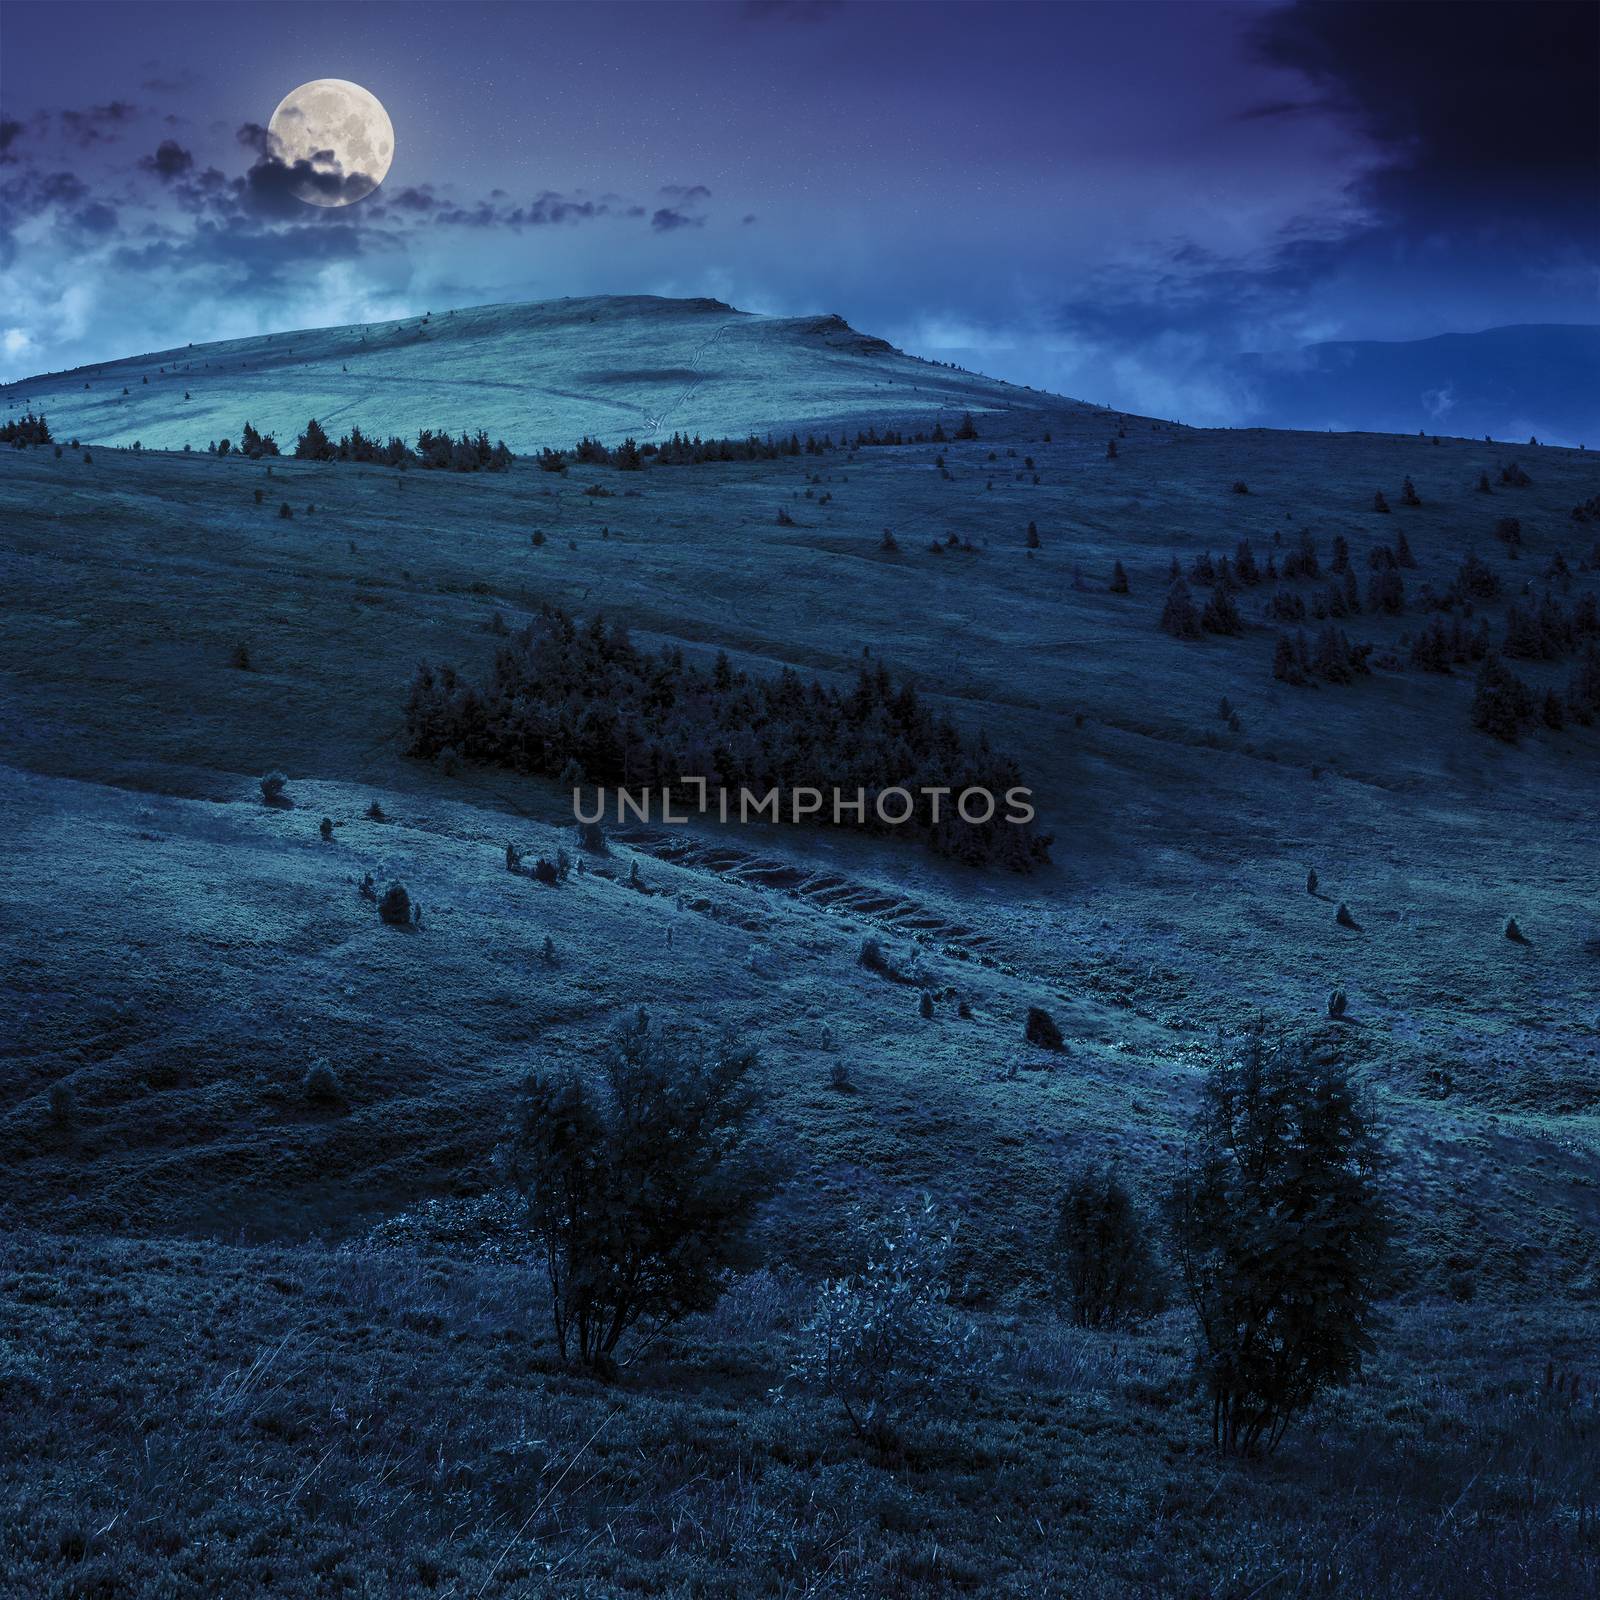 coniferous forest on a hillside at night by Pellinni